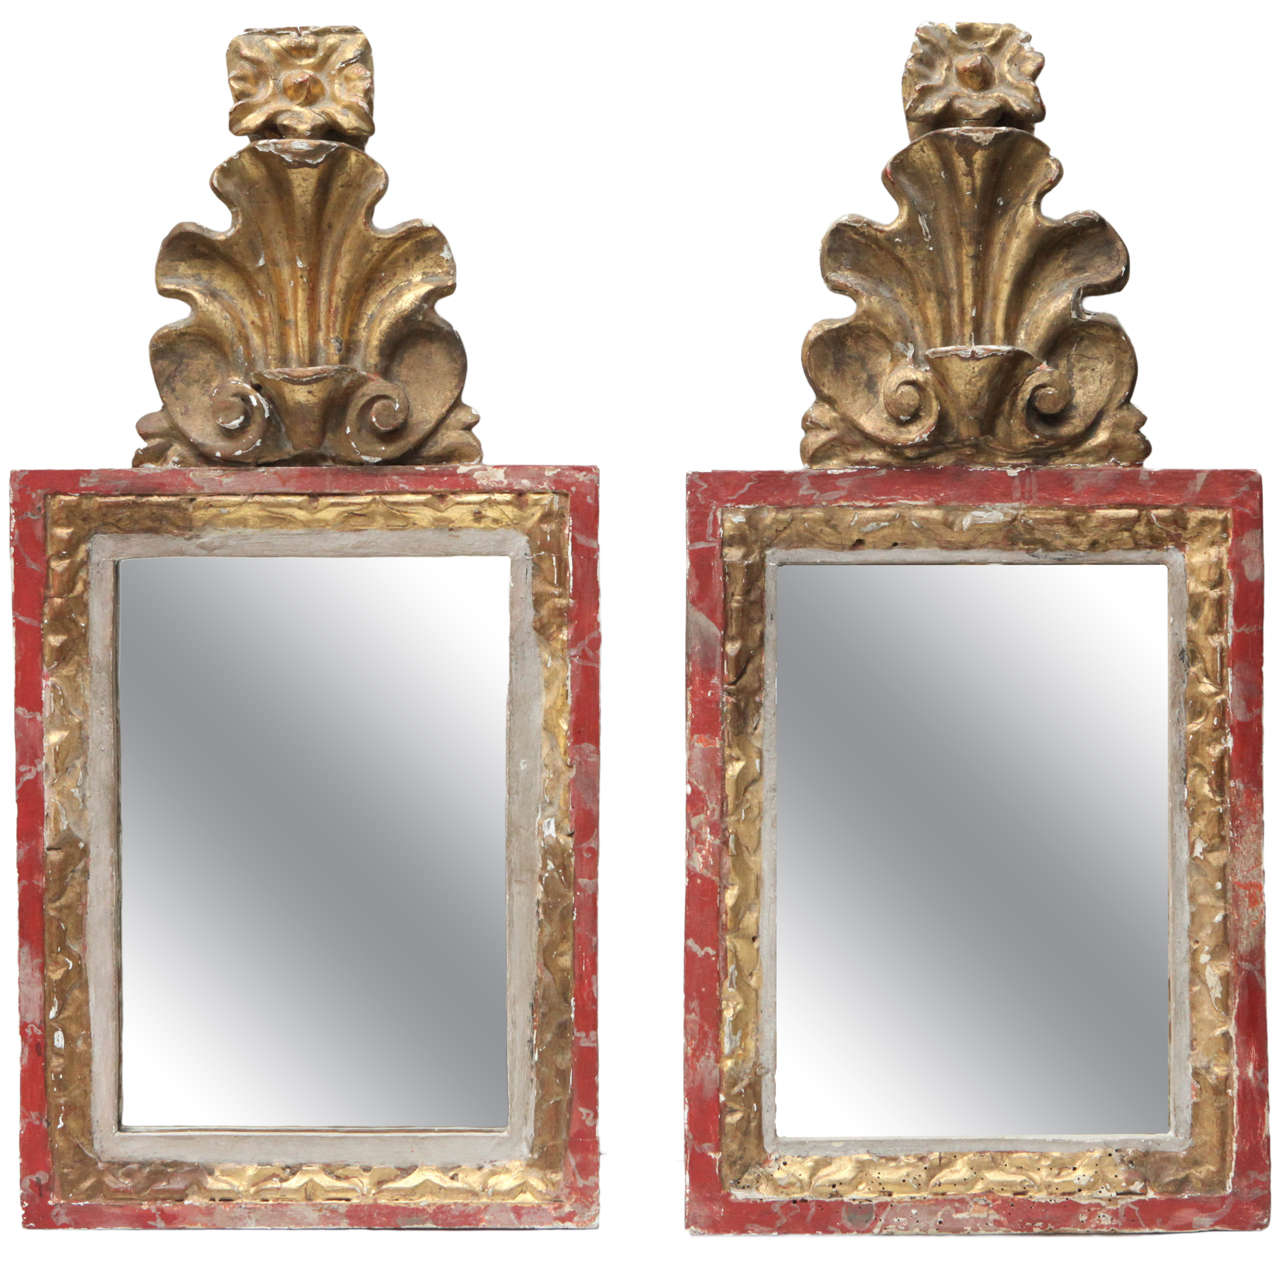 Pair of Small 18th Century Hand-Carved Mirrors